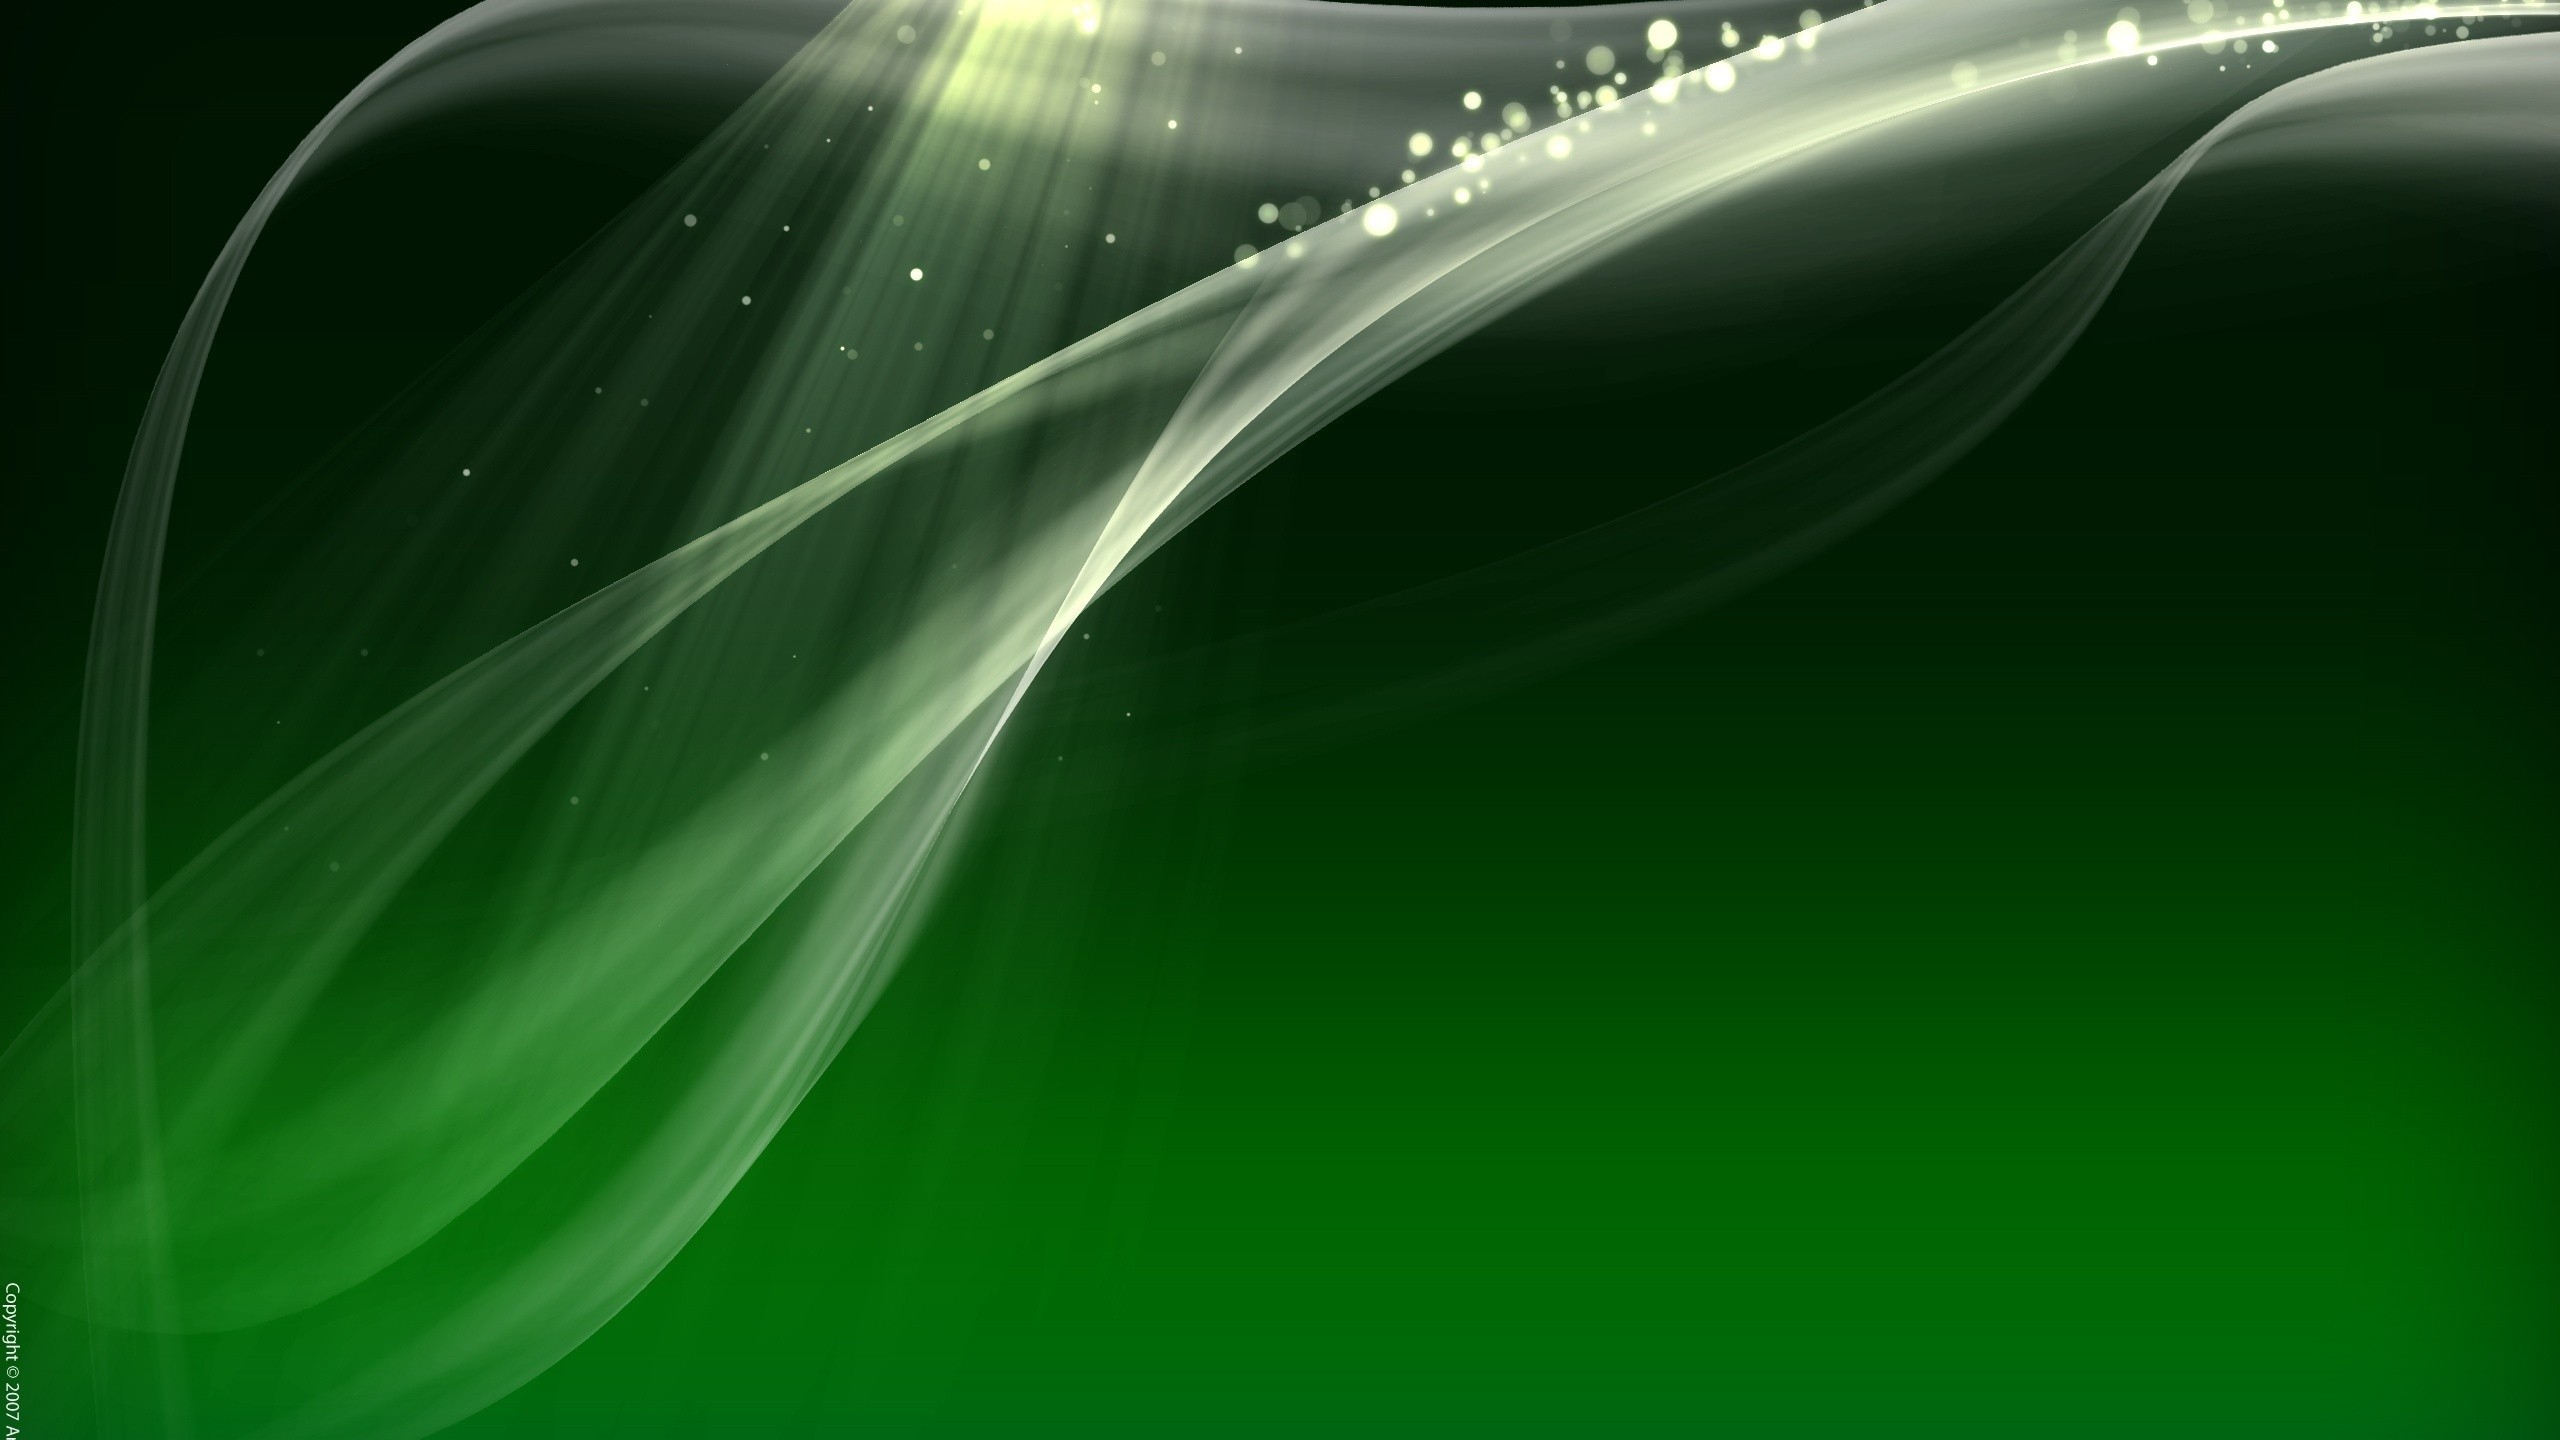 2560x1440 Download image Windows 8 Green Abstract Wallpaper PC, Android, iPhone .